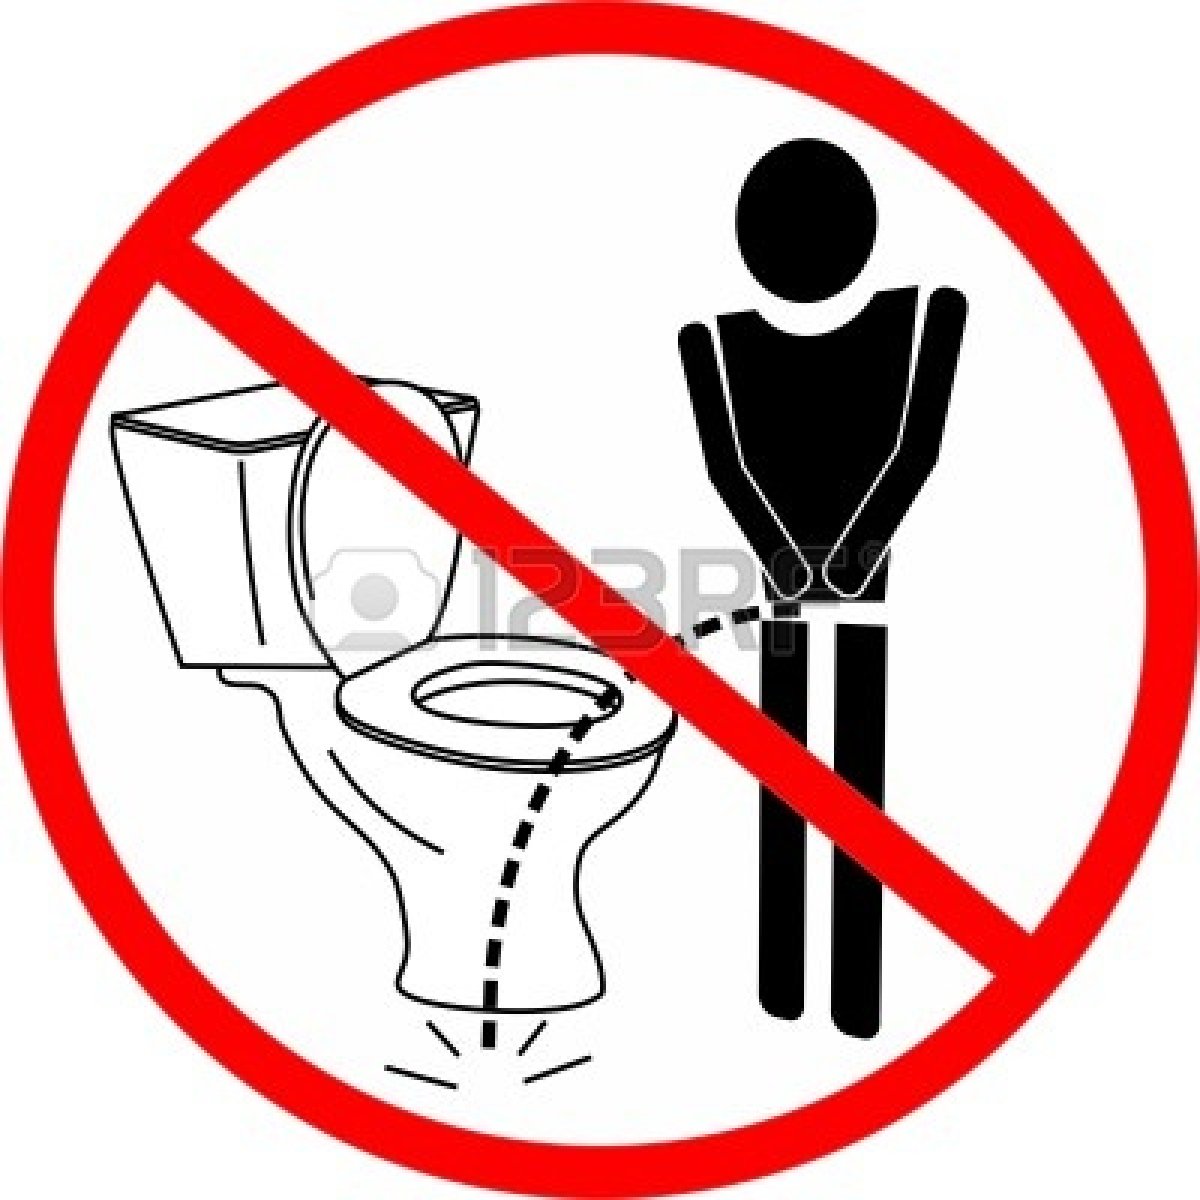 Pee   Forbidden To Urinate   Clipart Panda   Free Clipart Images